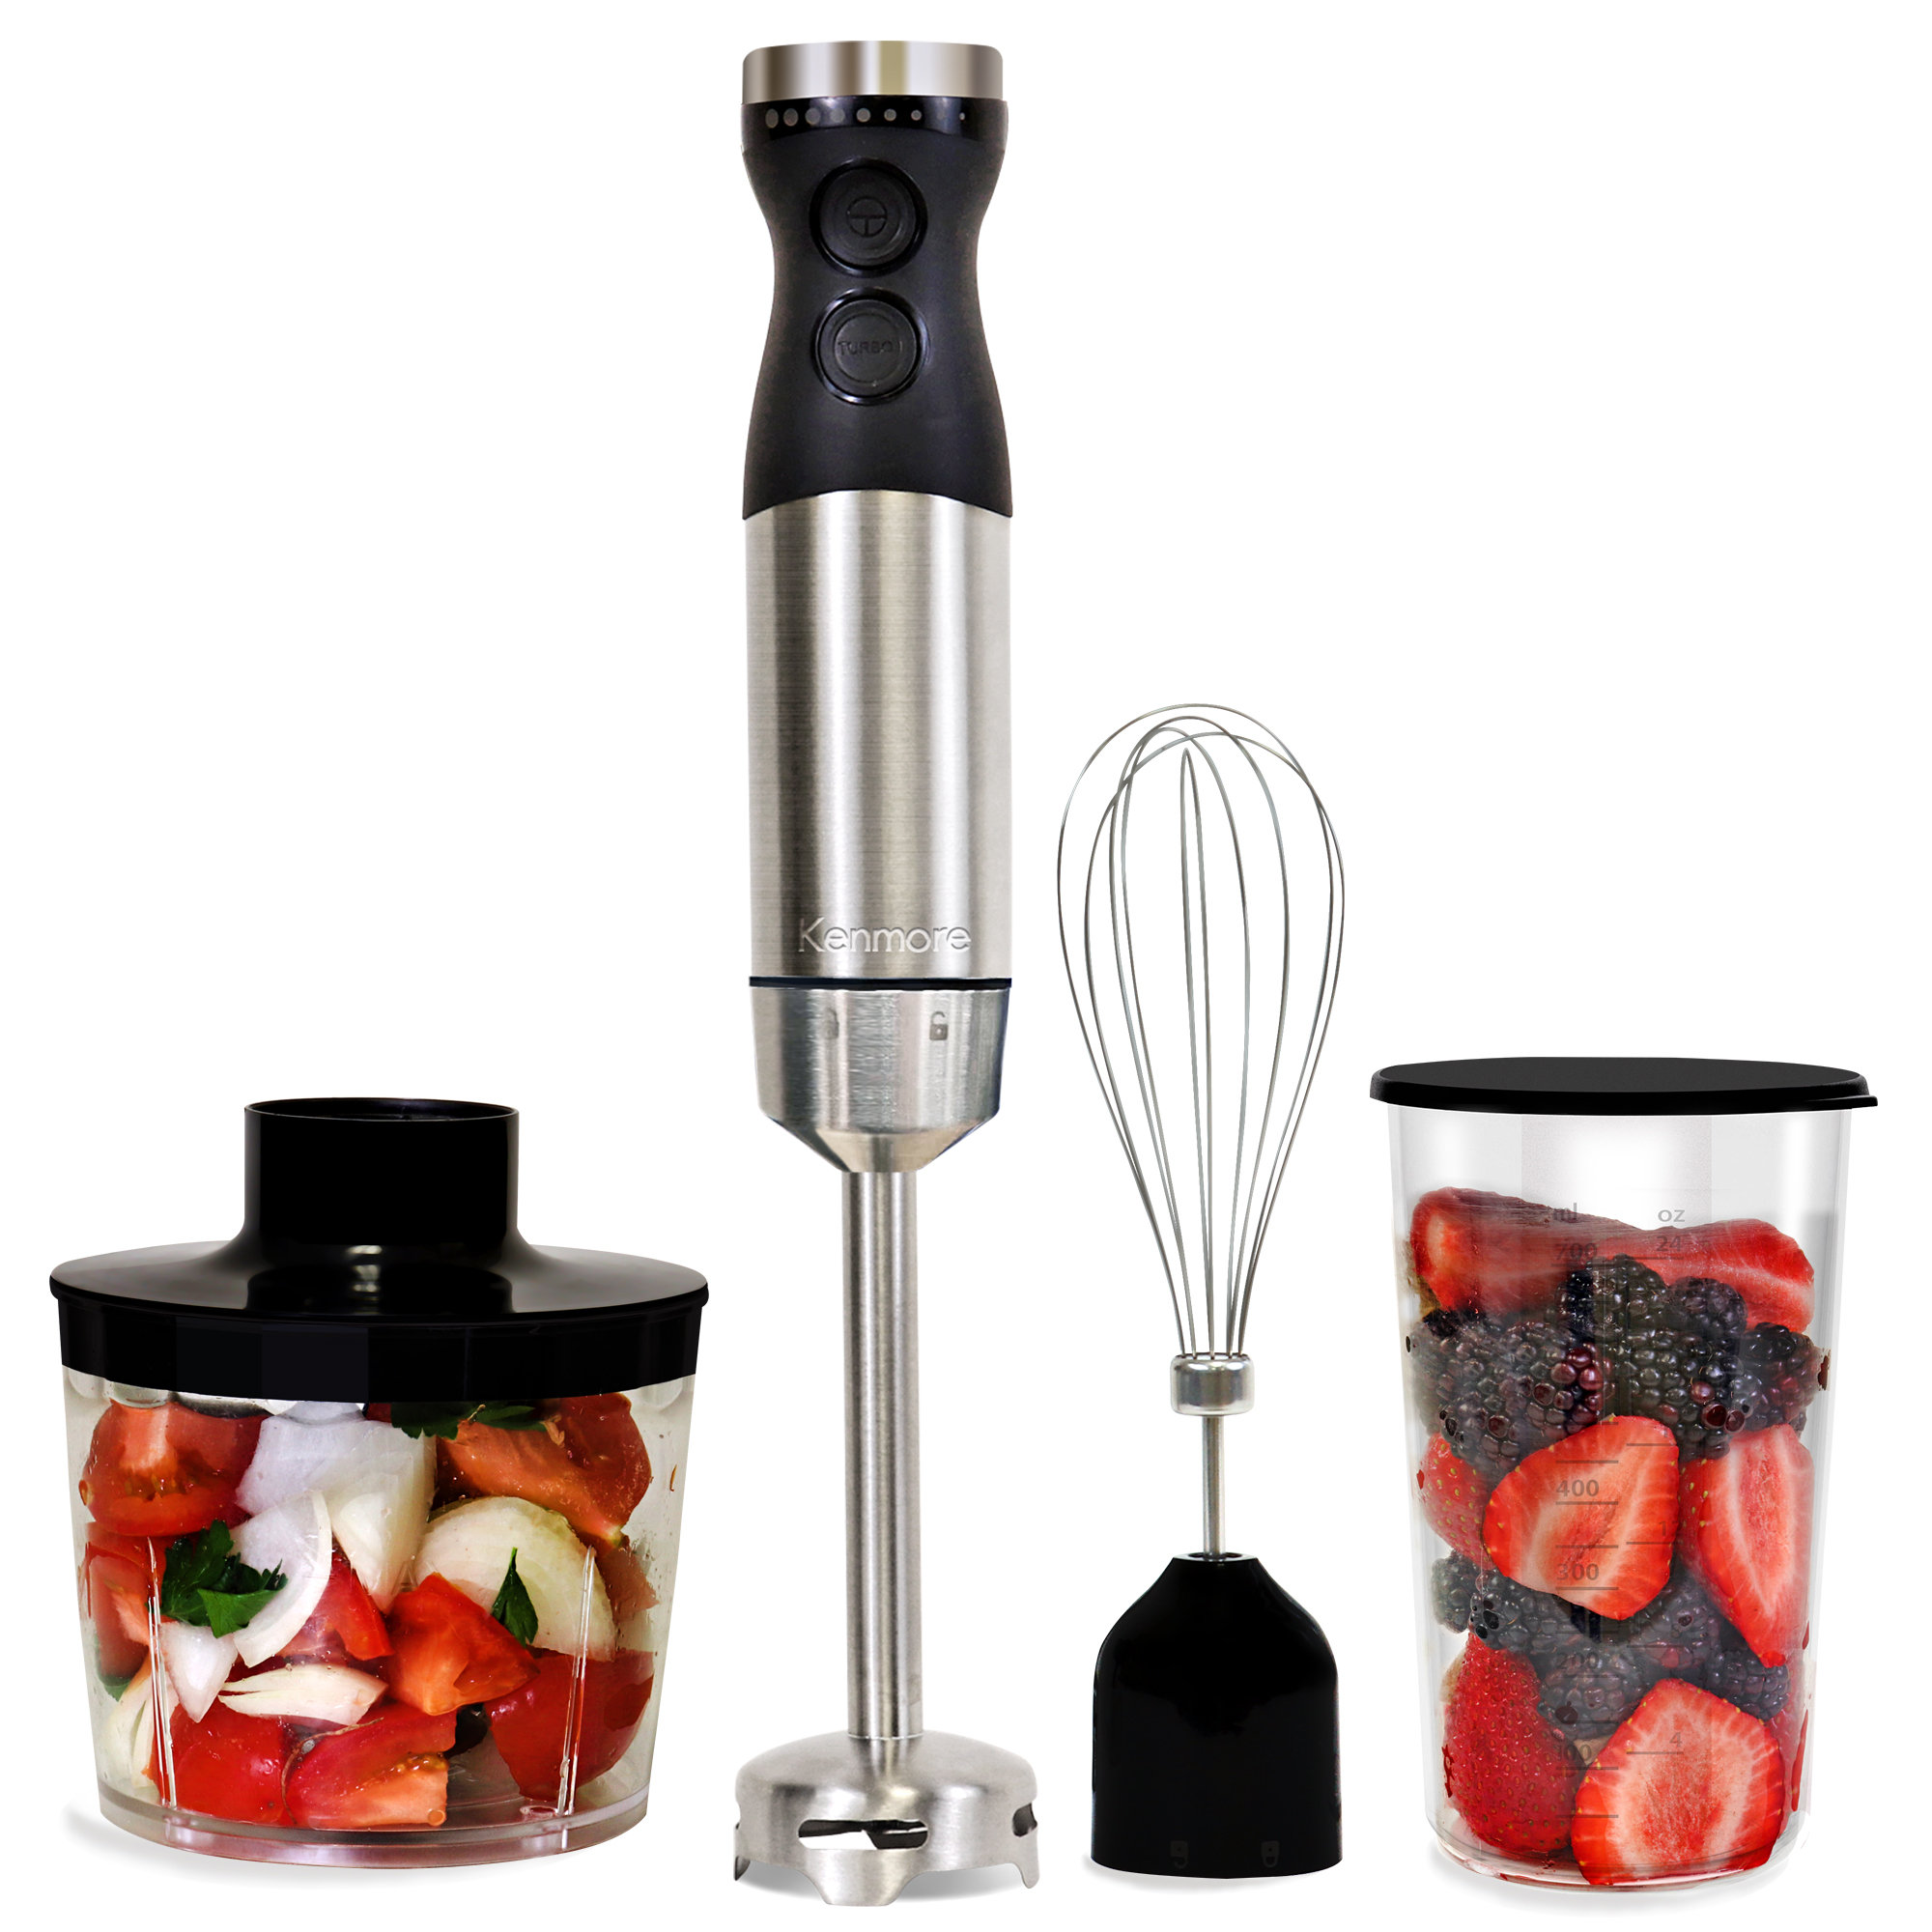 Kenmore Immersion Hand Blender Set with Food Chopper and Whisk